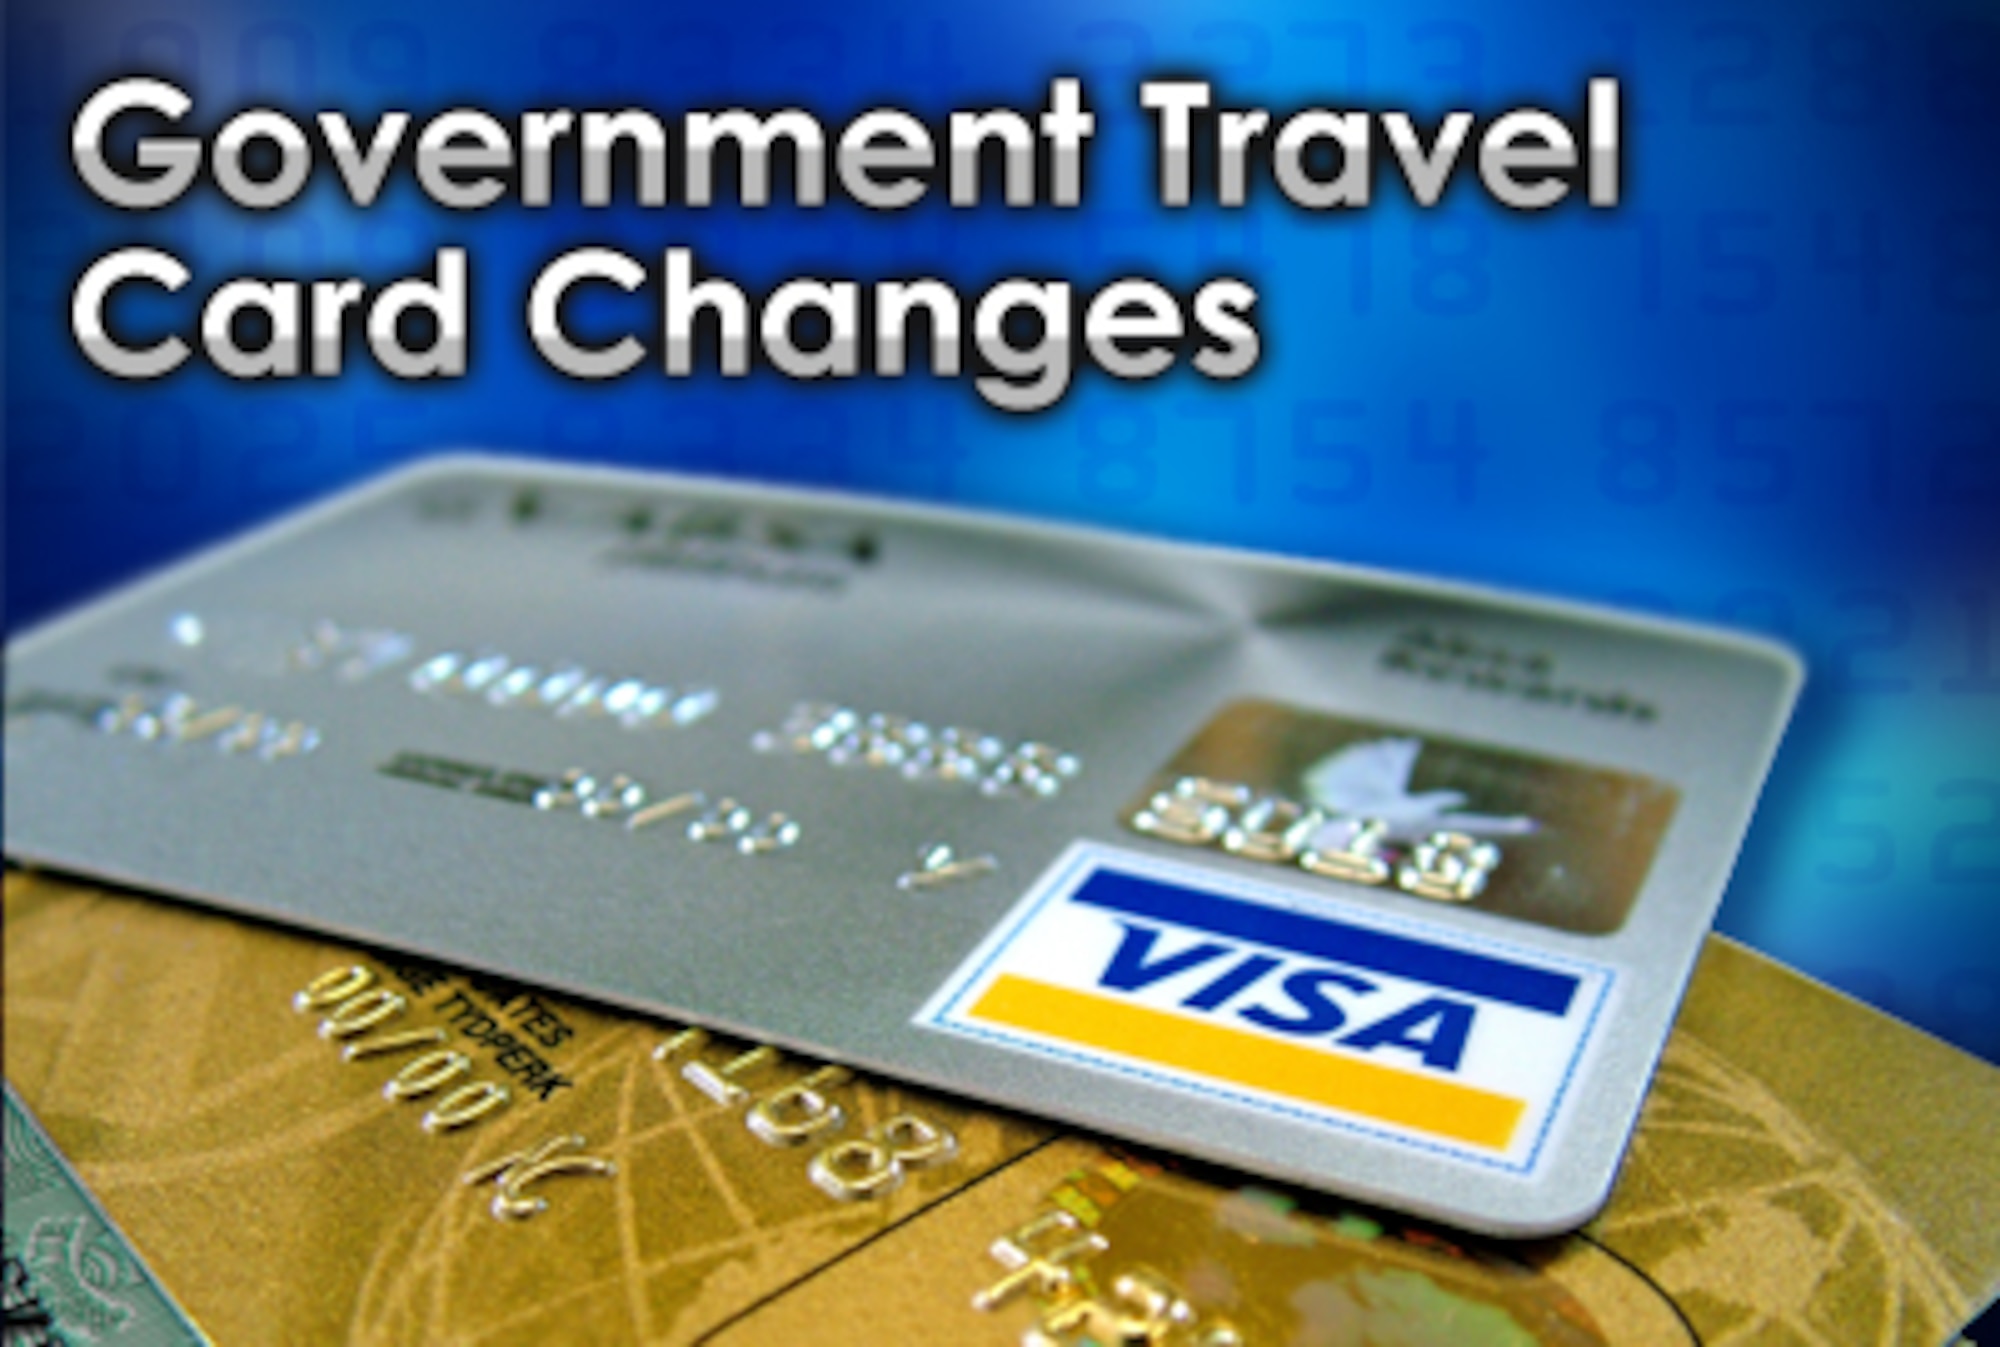 In an effort to curtail government travel card abuse and delinquency, Air Force officials are piloting an unprecedented controlled spend account concept through Sept. 3 with an expected service-wide rollout of fall 2010. (U.S. Air Force graphic)